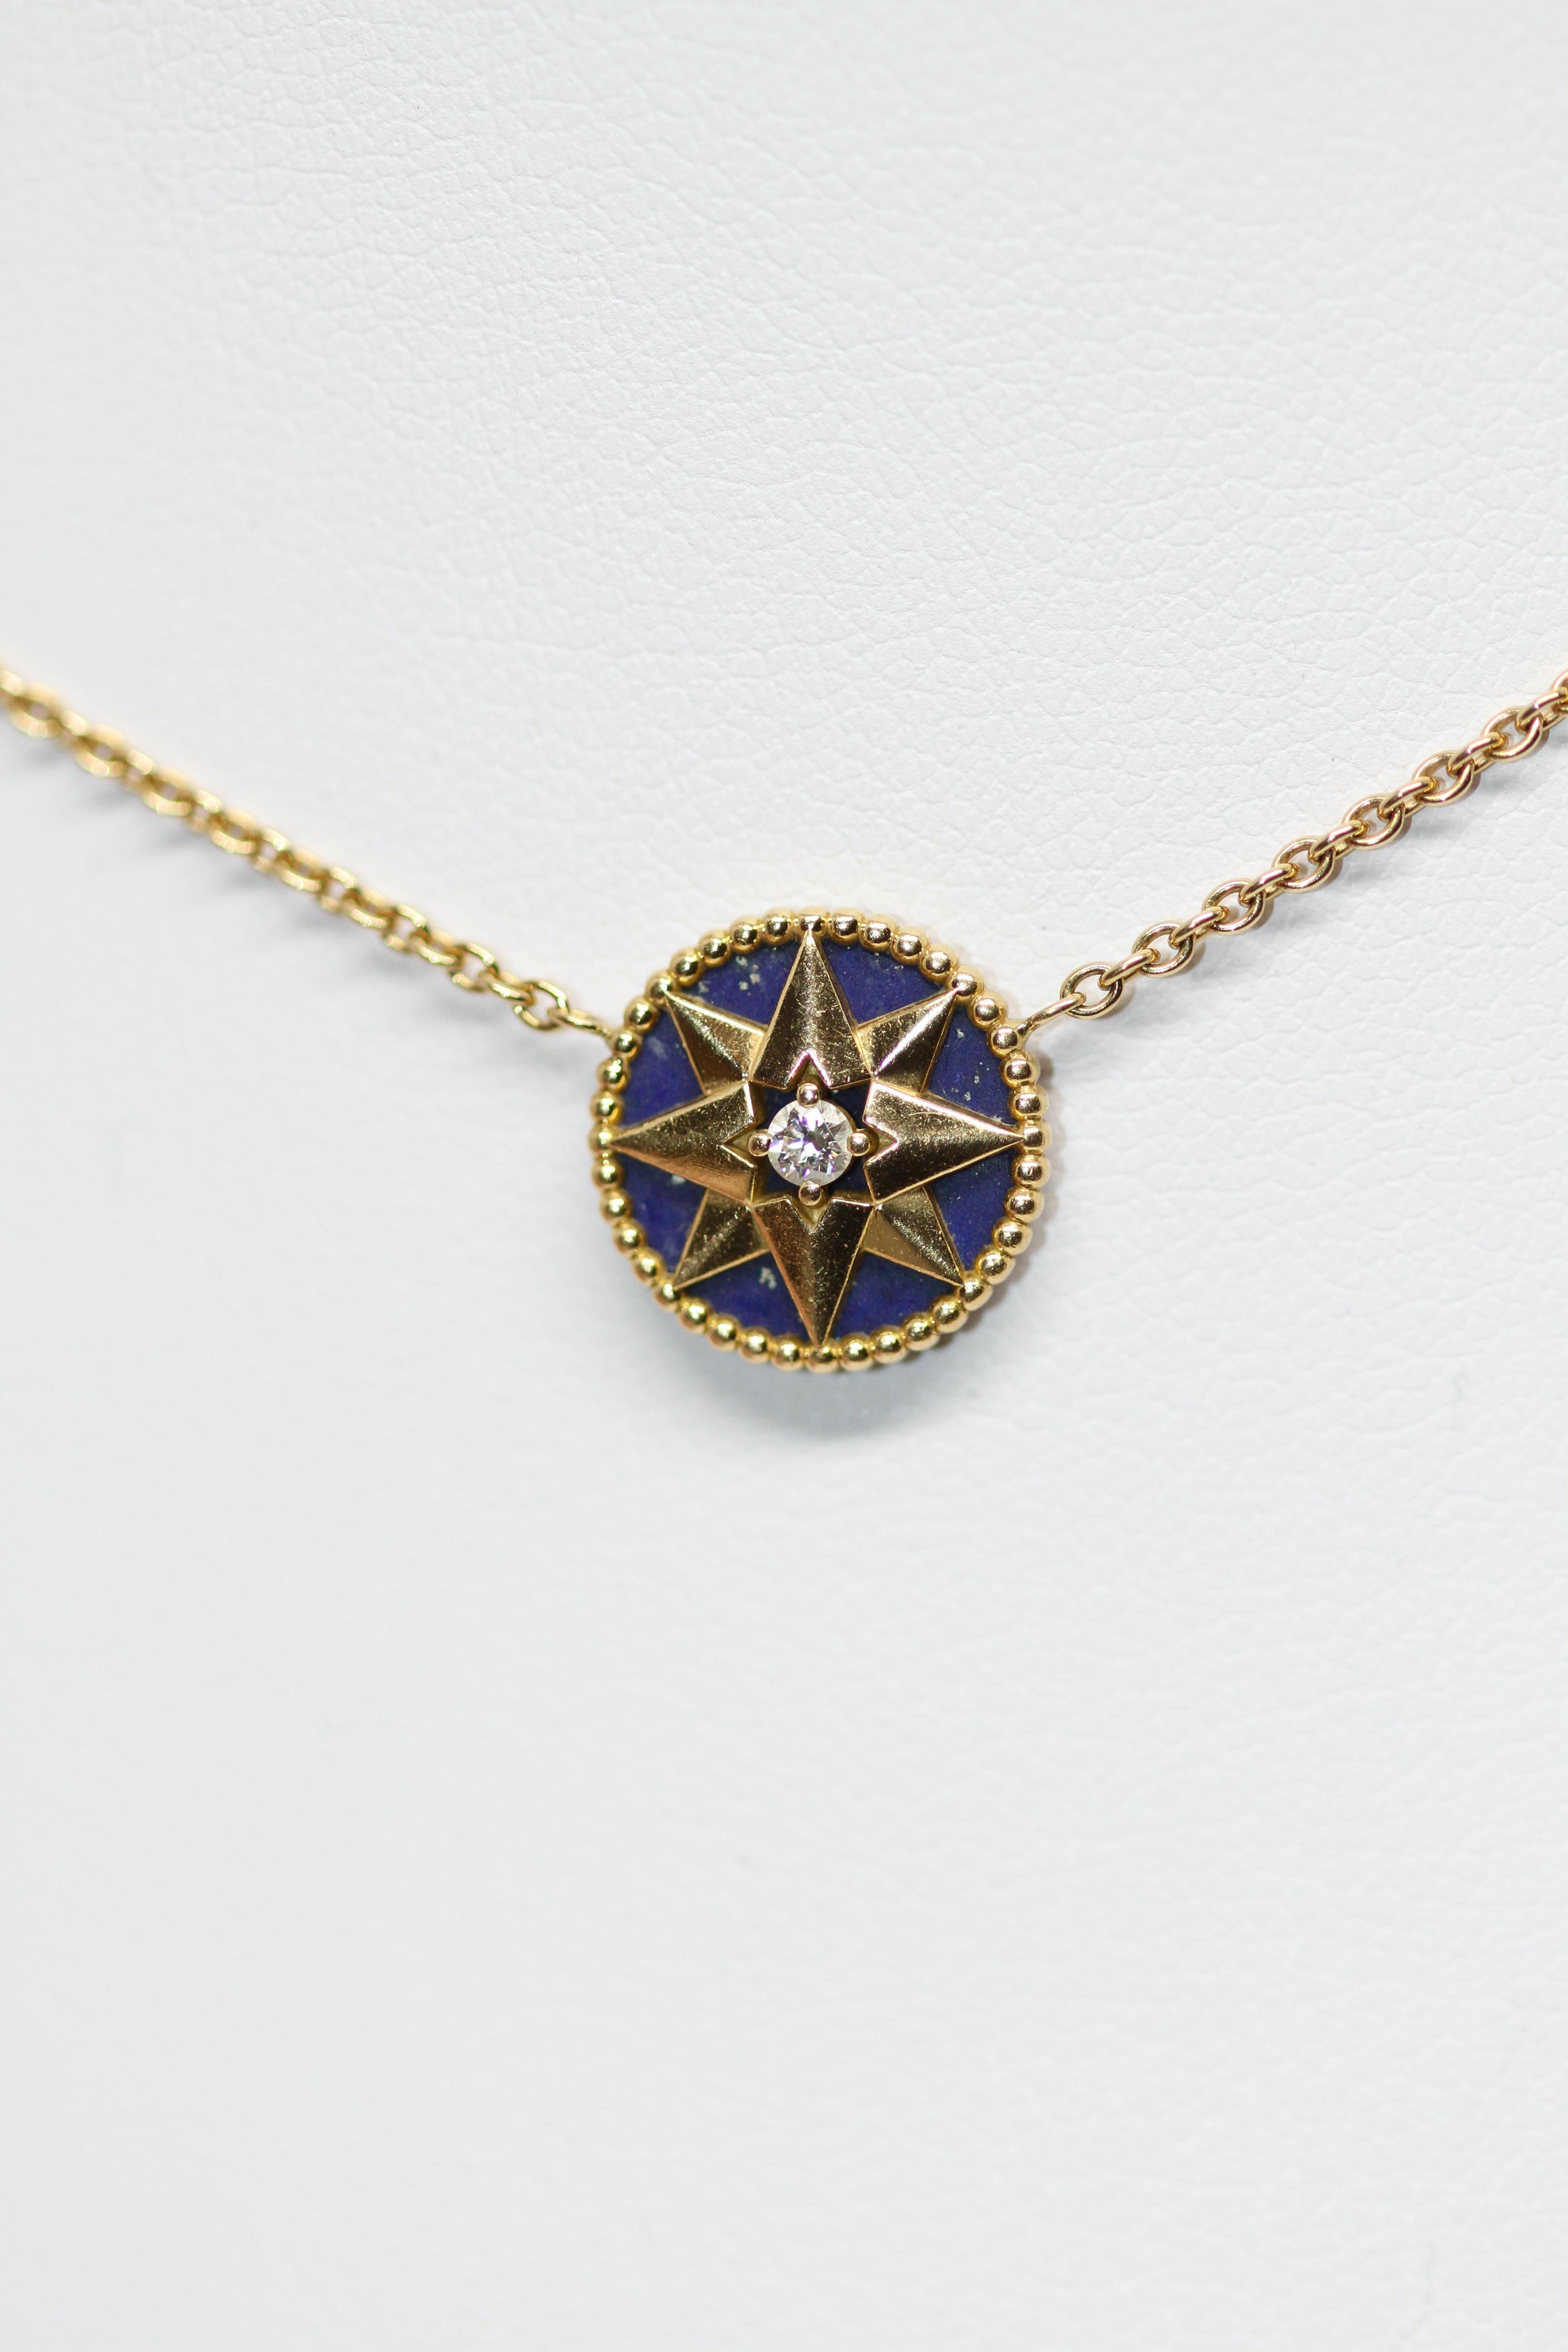 Evolve Stg Gold Plated Compass Necklace  Westende Jewellers